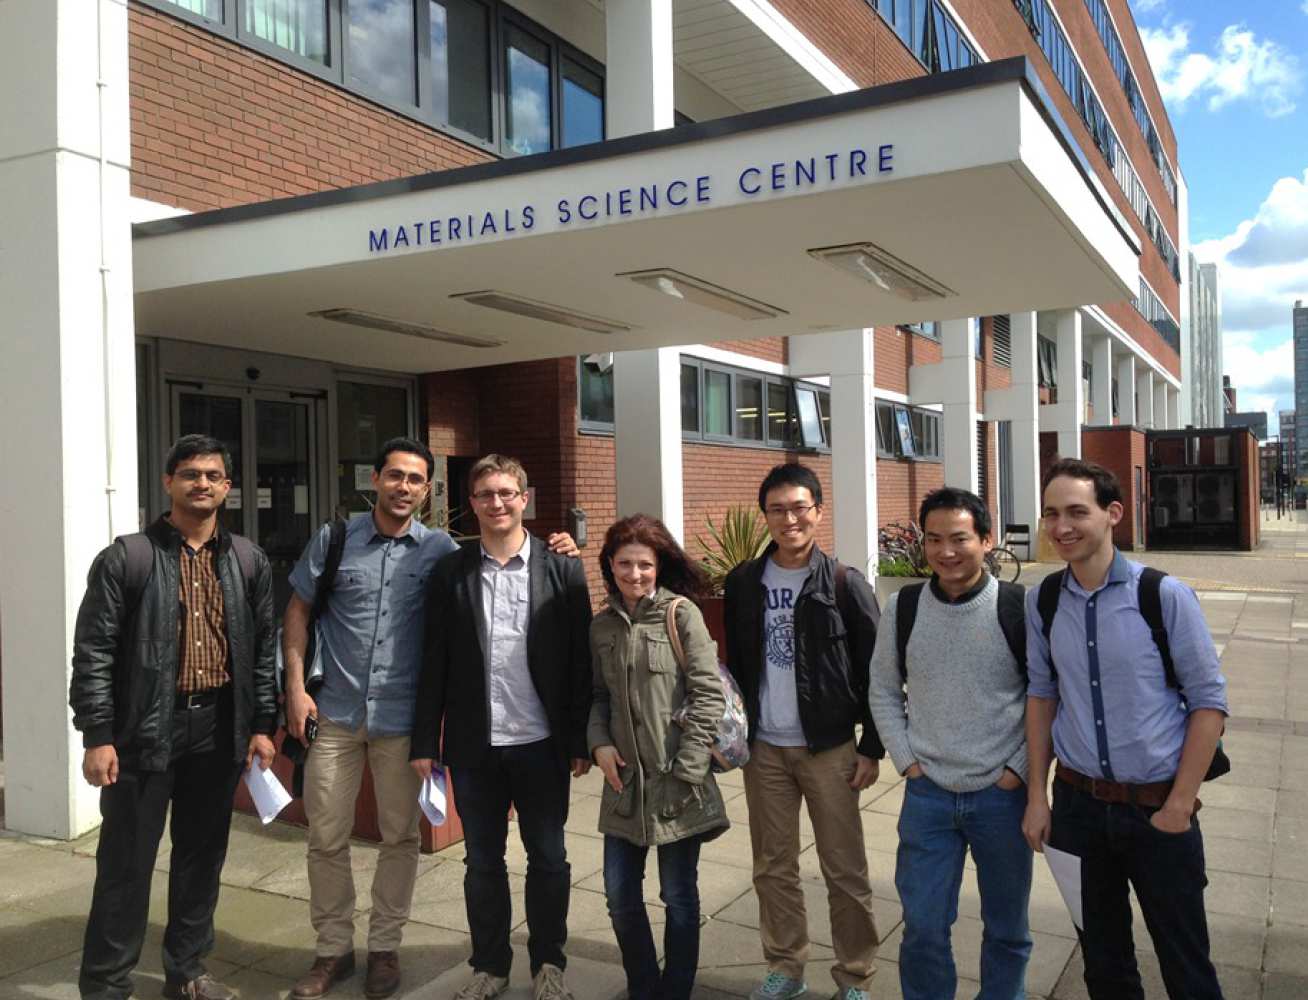 HexMat PDRAs at the Materials Science Centre, University of Manchester (left to right): Dr Rajesh Korla, Dr Hamid Abdolvand (Oxford), Dr Zoltan Szaraz, Dr Eleni Sarakinou (Manchester), Dr Terry Jun, Dr Zhen Zhang and Dr Thomas White (Imperial).